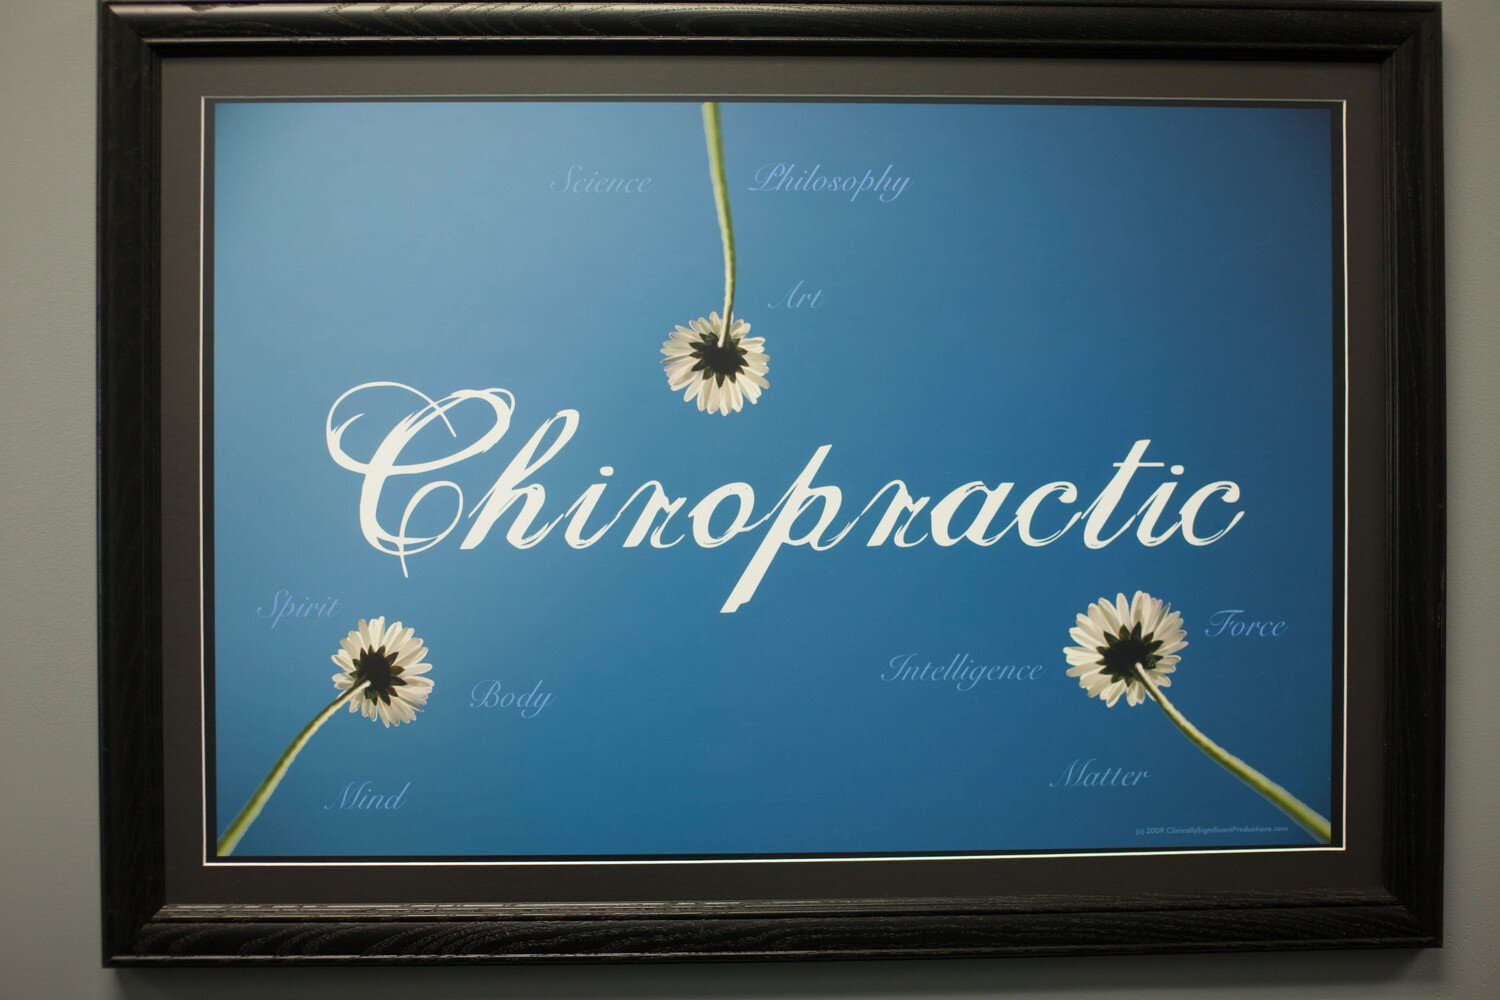 About 3 — Chiropractic Concepts